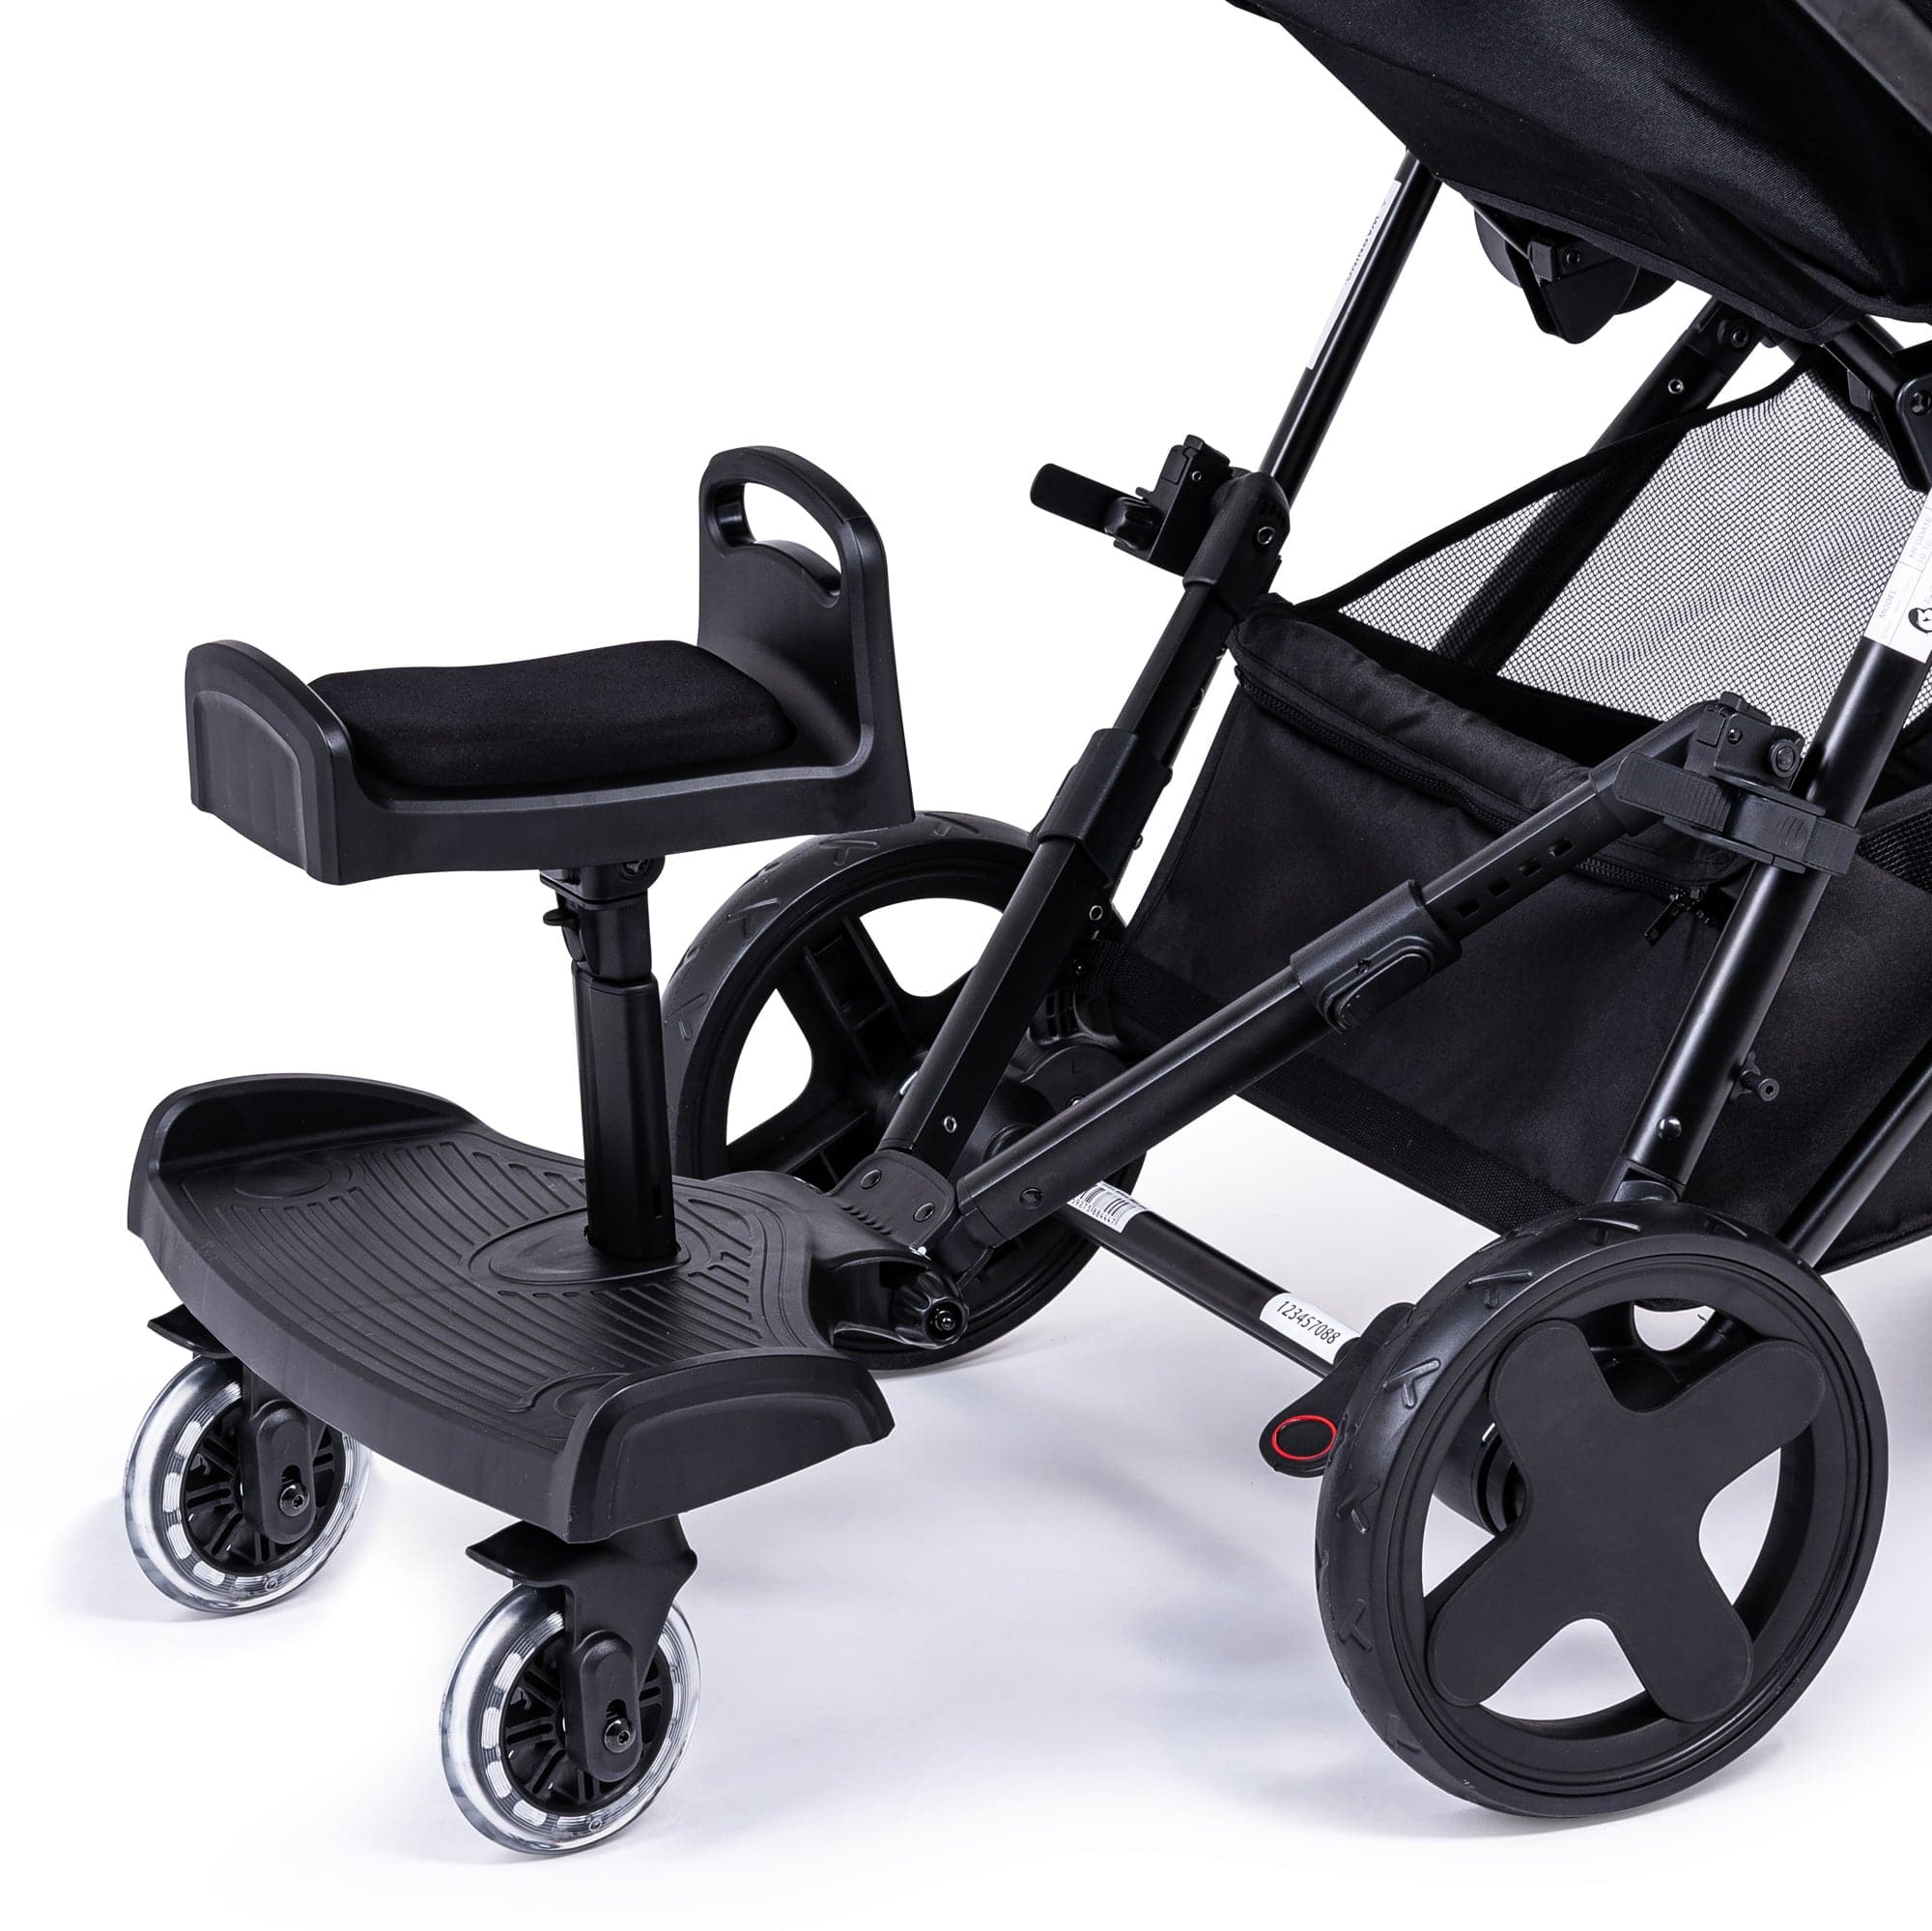 Ride On Board with Seat Compatible with Kiddicouture - For Your Little One